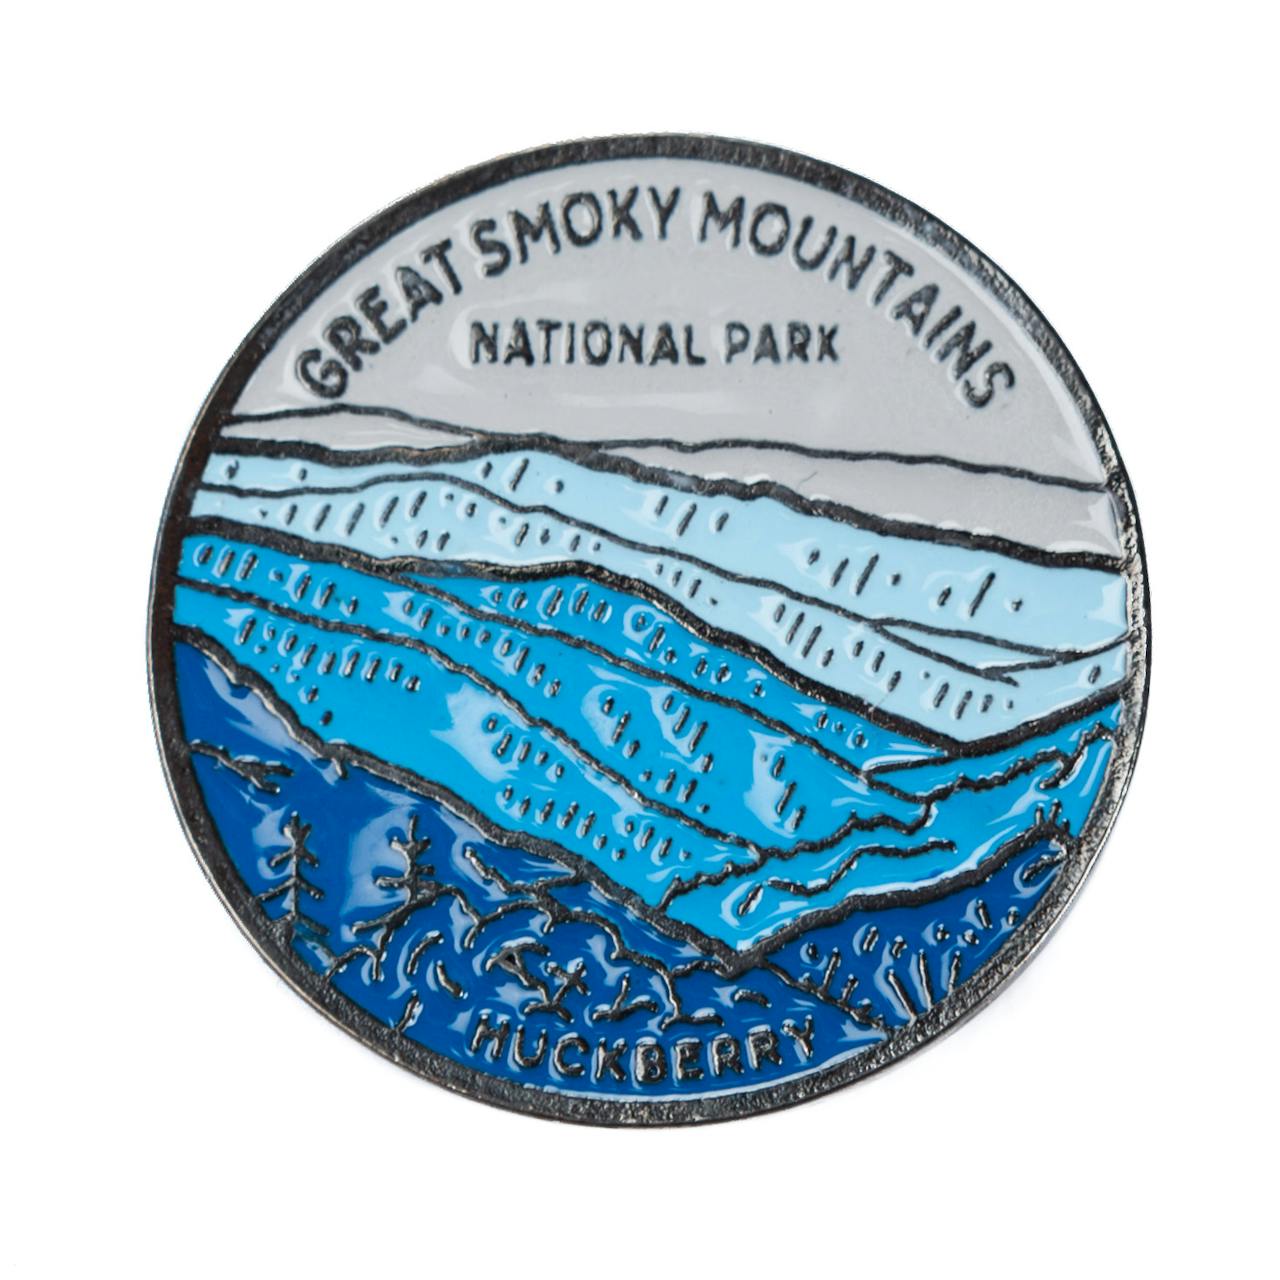 Huckberry Great Smoky Mountains National Park Pin